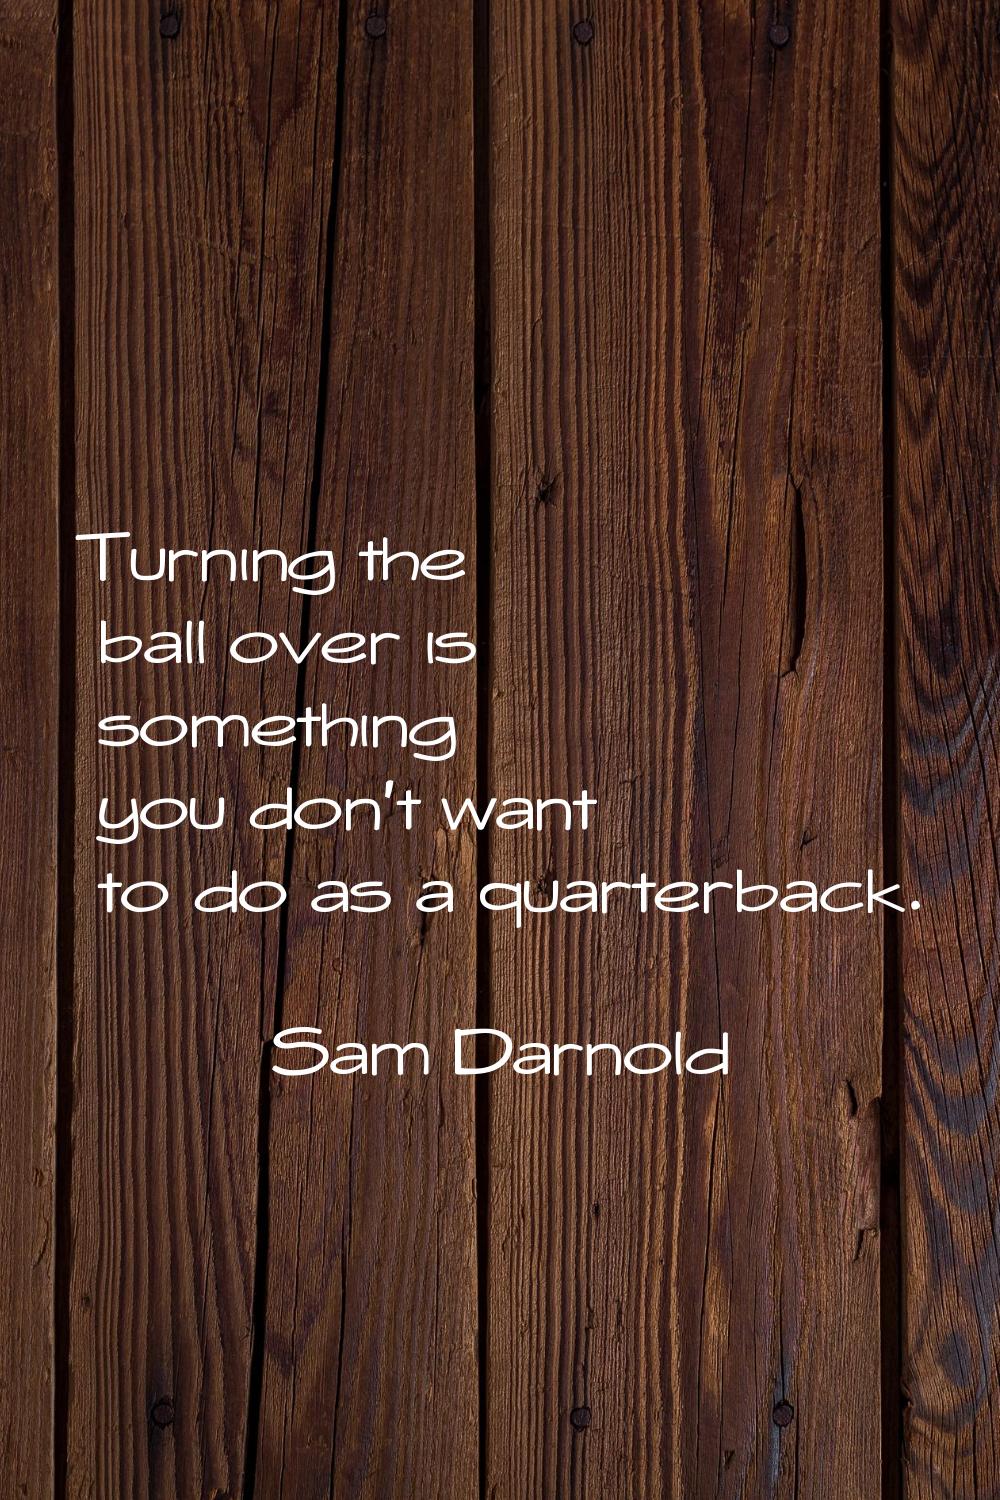 Turning the ball over is something you don't want to do as a quarterback.